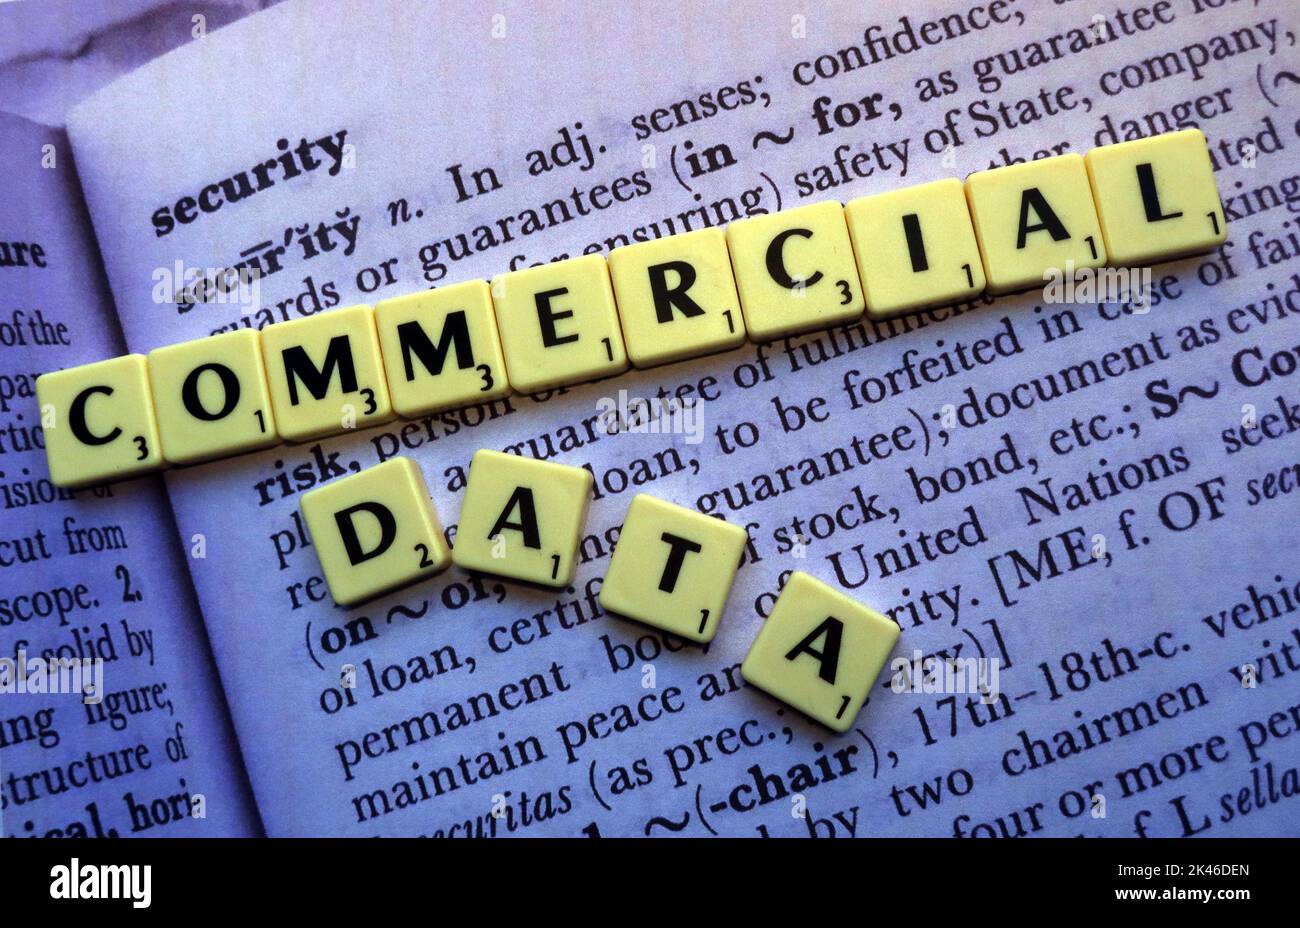 Commercial Data,spelled out in Scrabble letters, on the dictionary definition of security Stock Photo